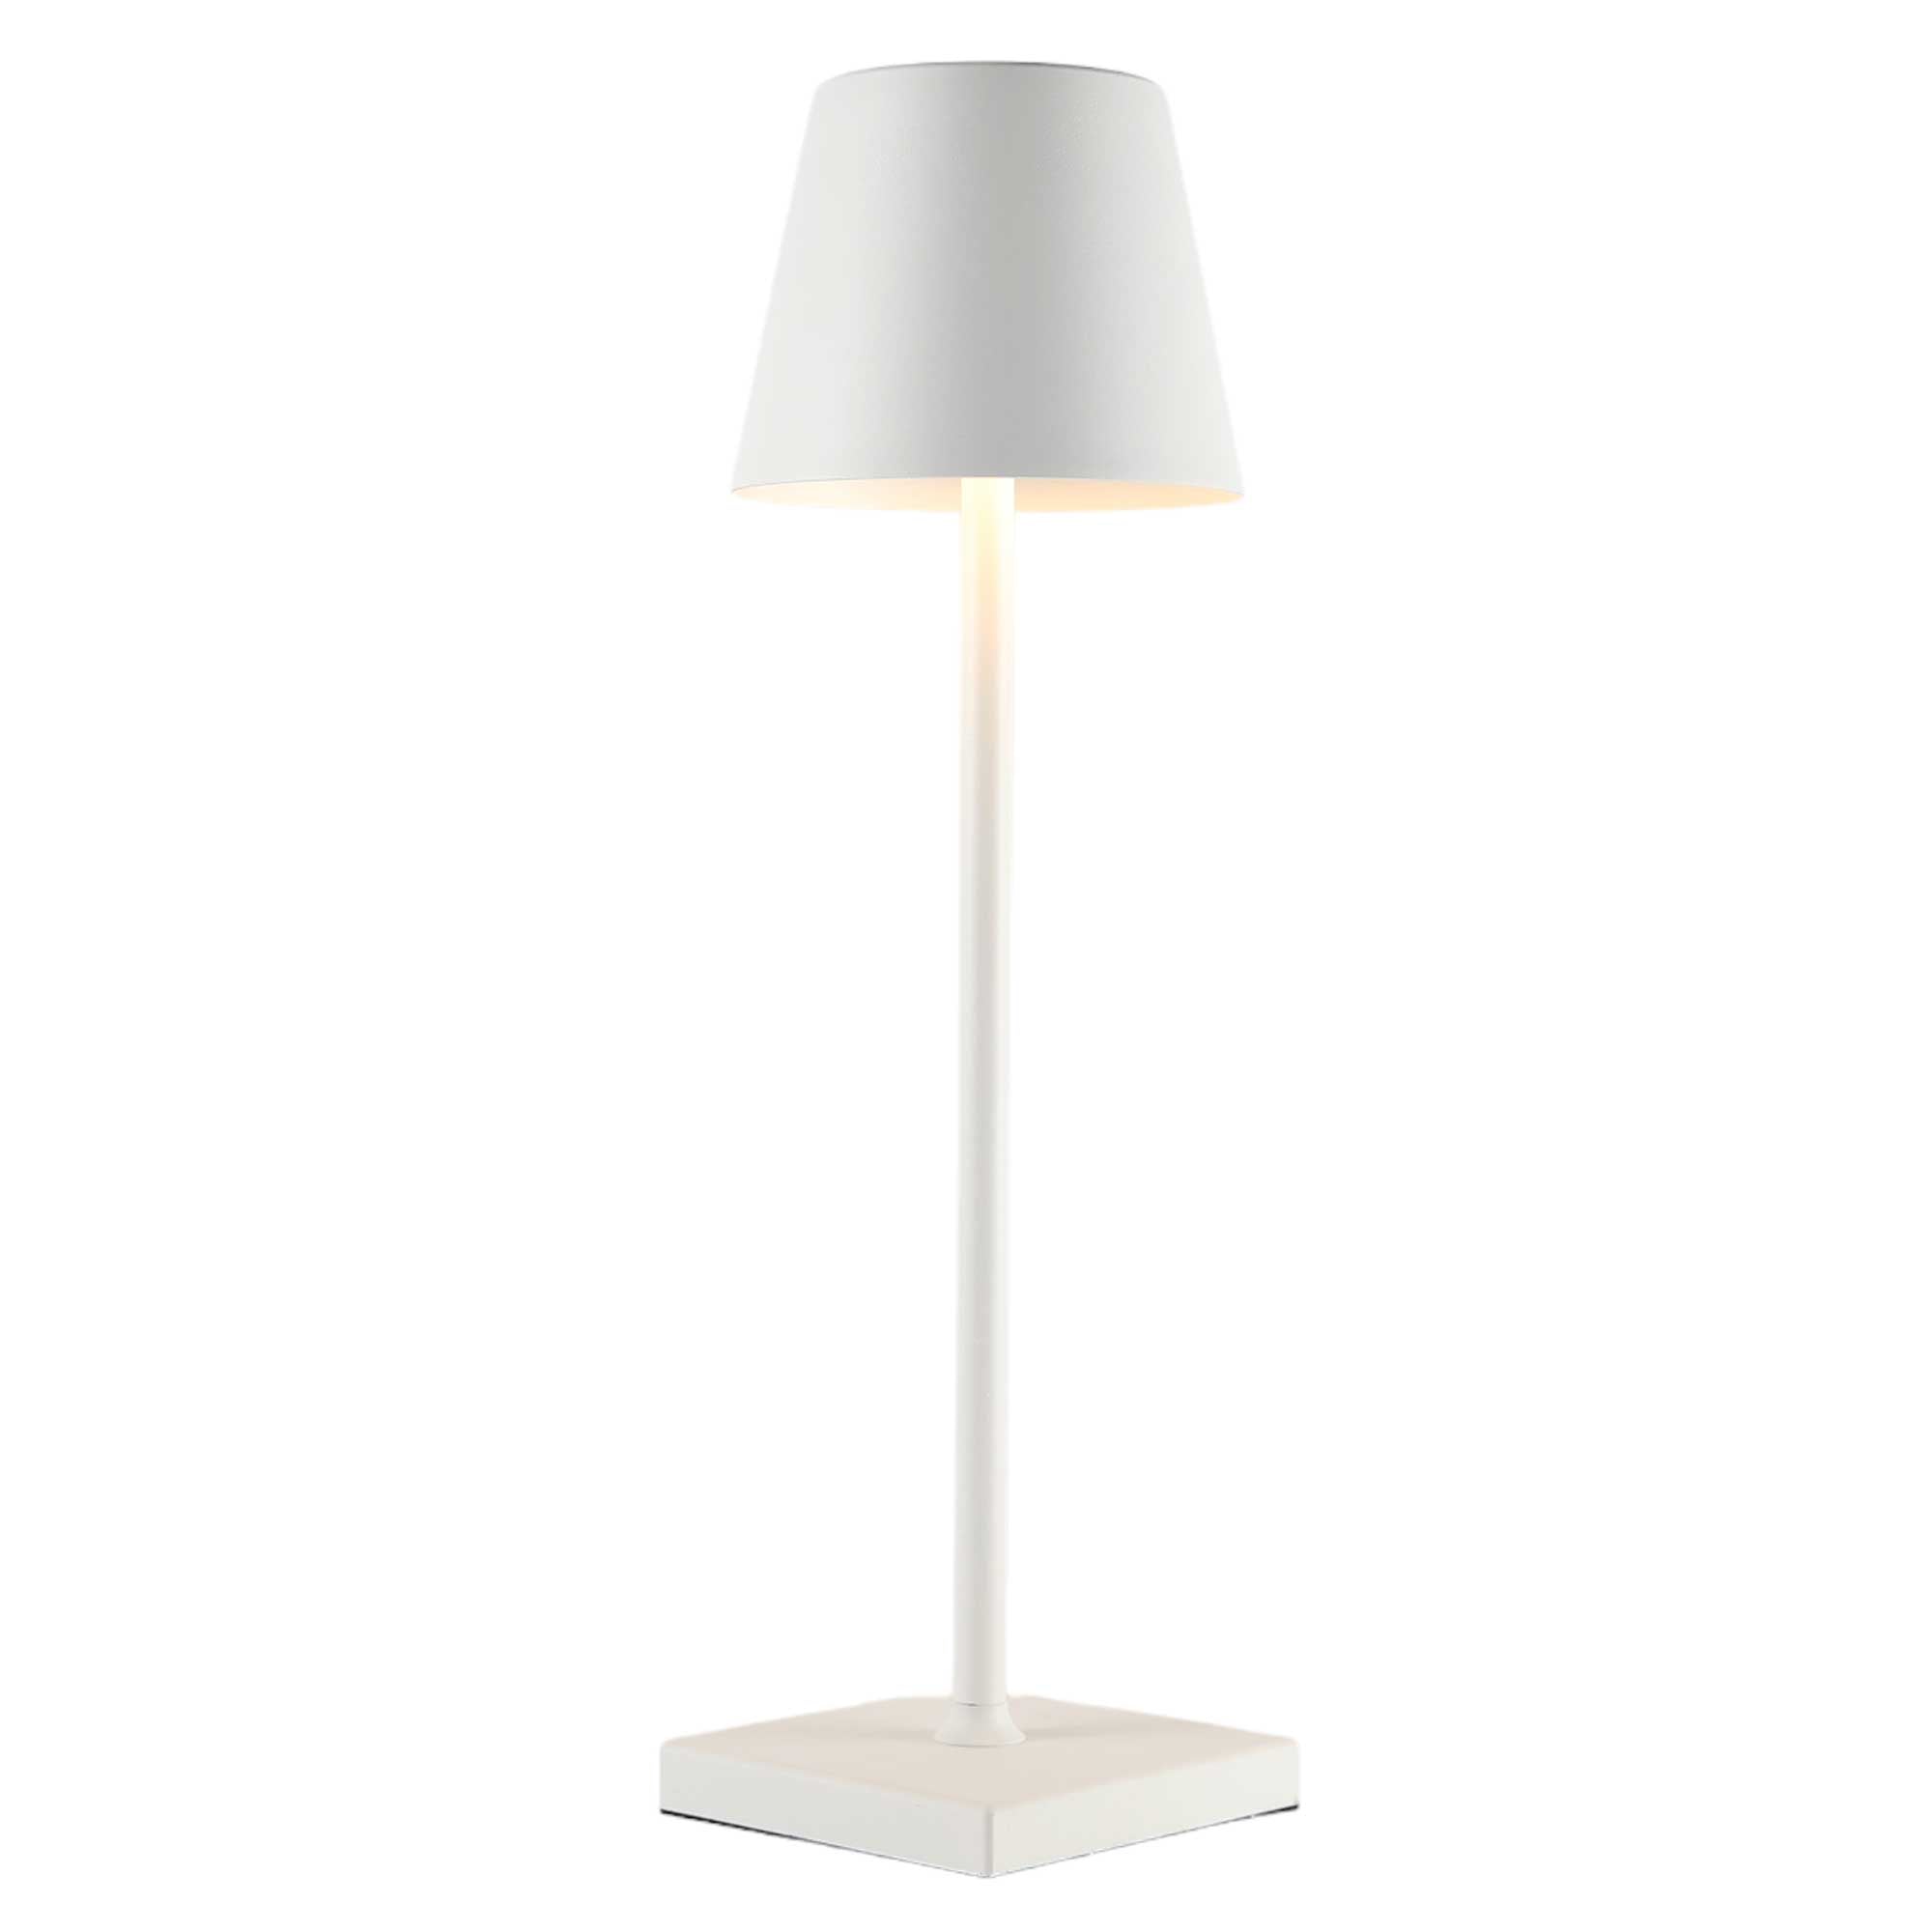 Ambience lamp with touch function - 3 colors. Black - white - gold